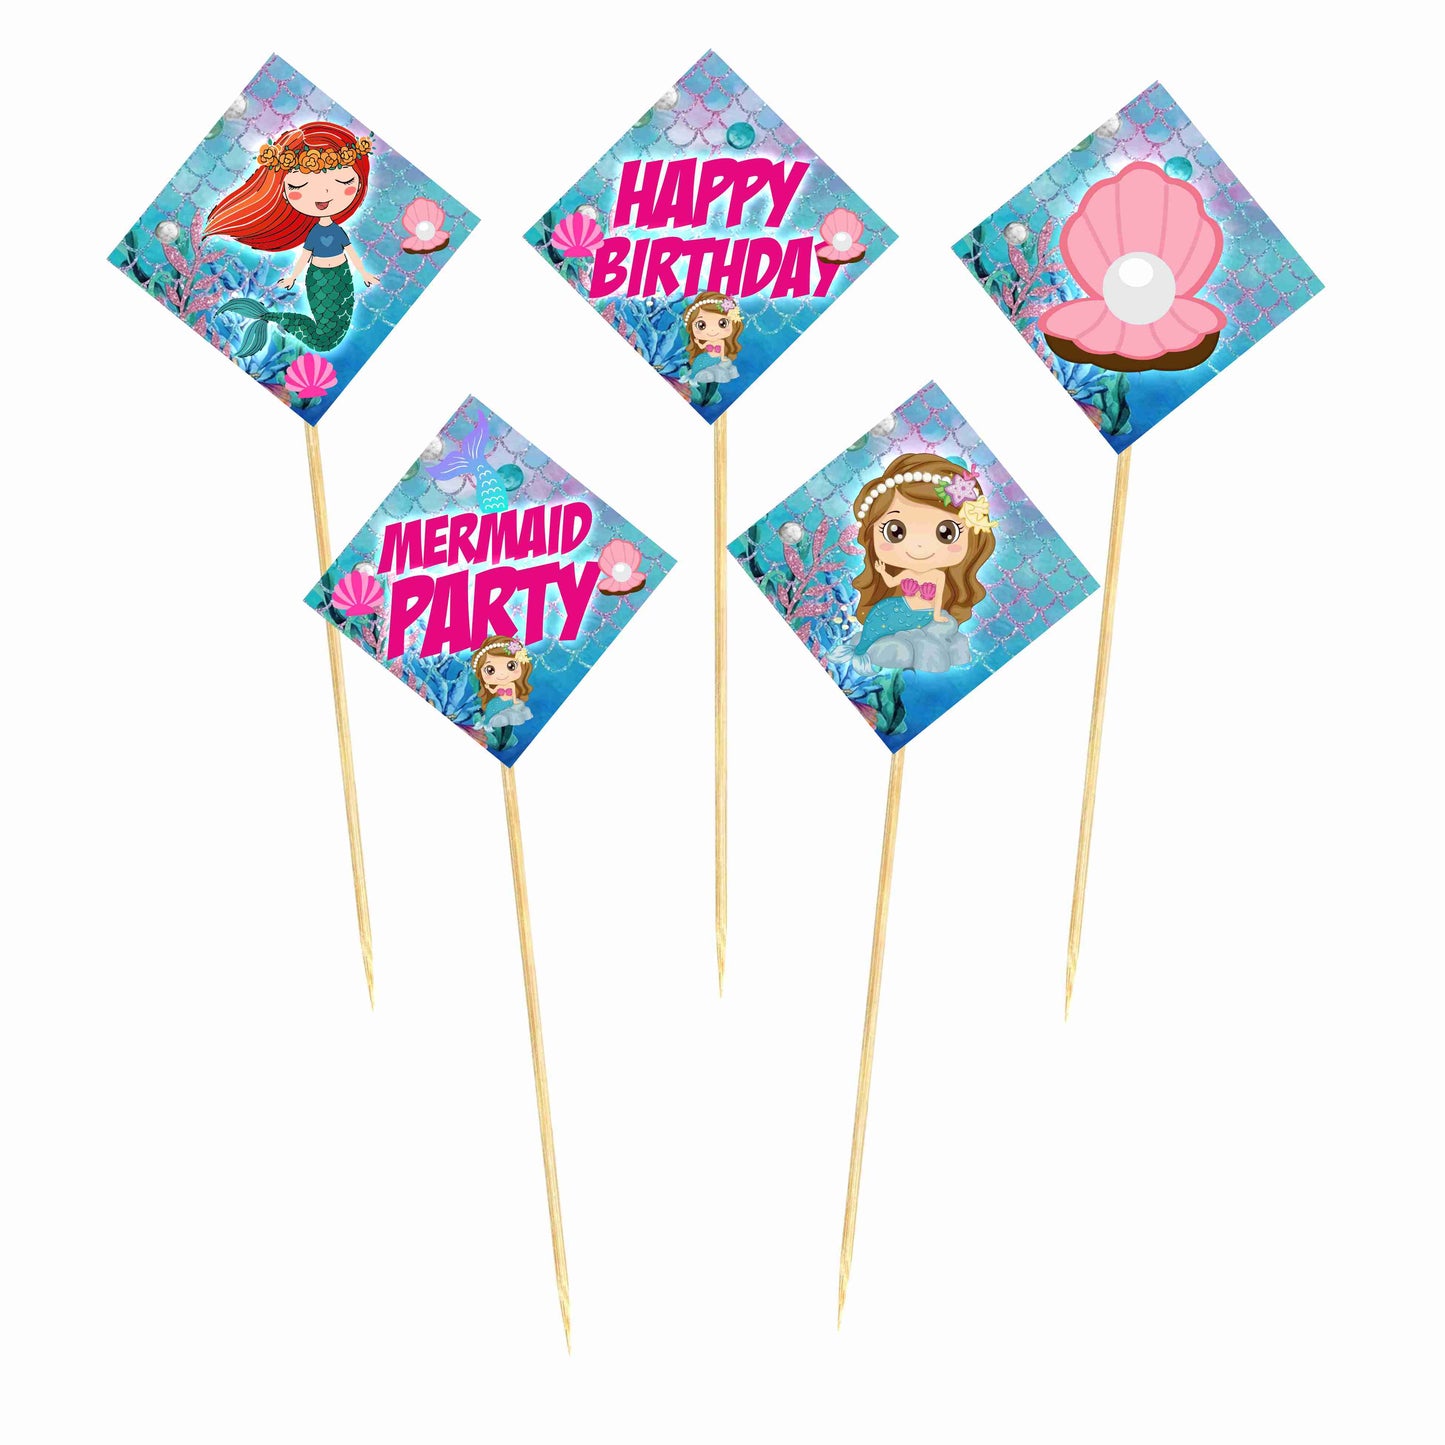 Mermaid Theme Cake Topper Pack of 10 Nos for Birthday Cake Decoration Theme Party Item For Boys Girls Adults Birthday Theme Decor